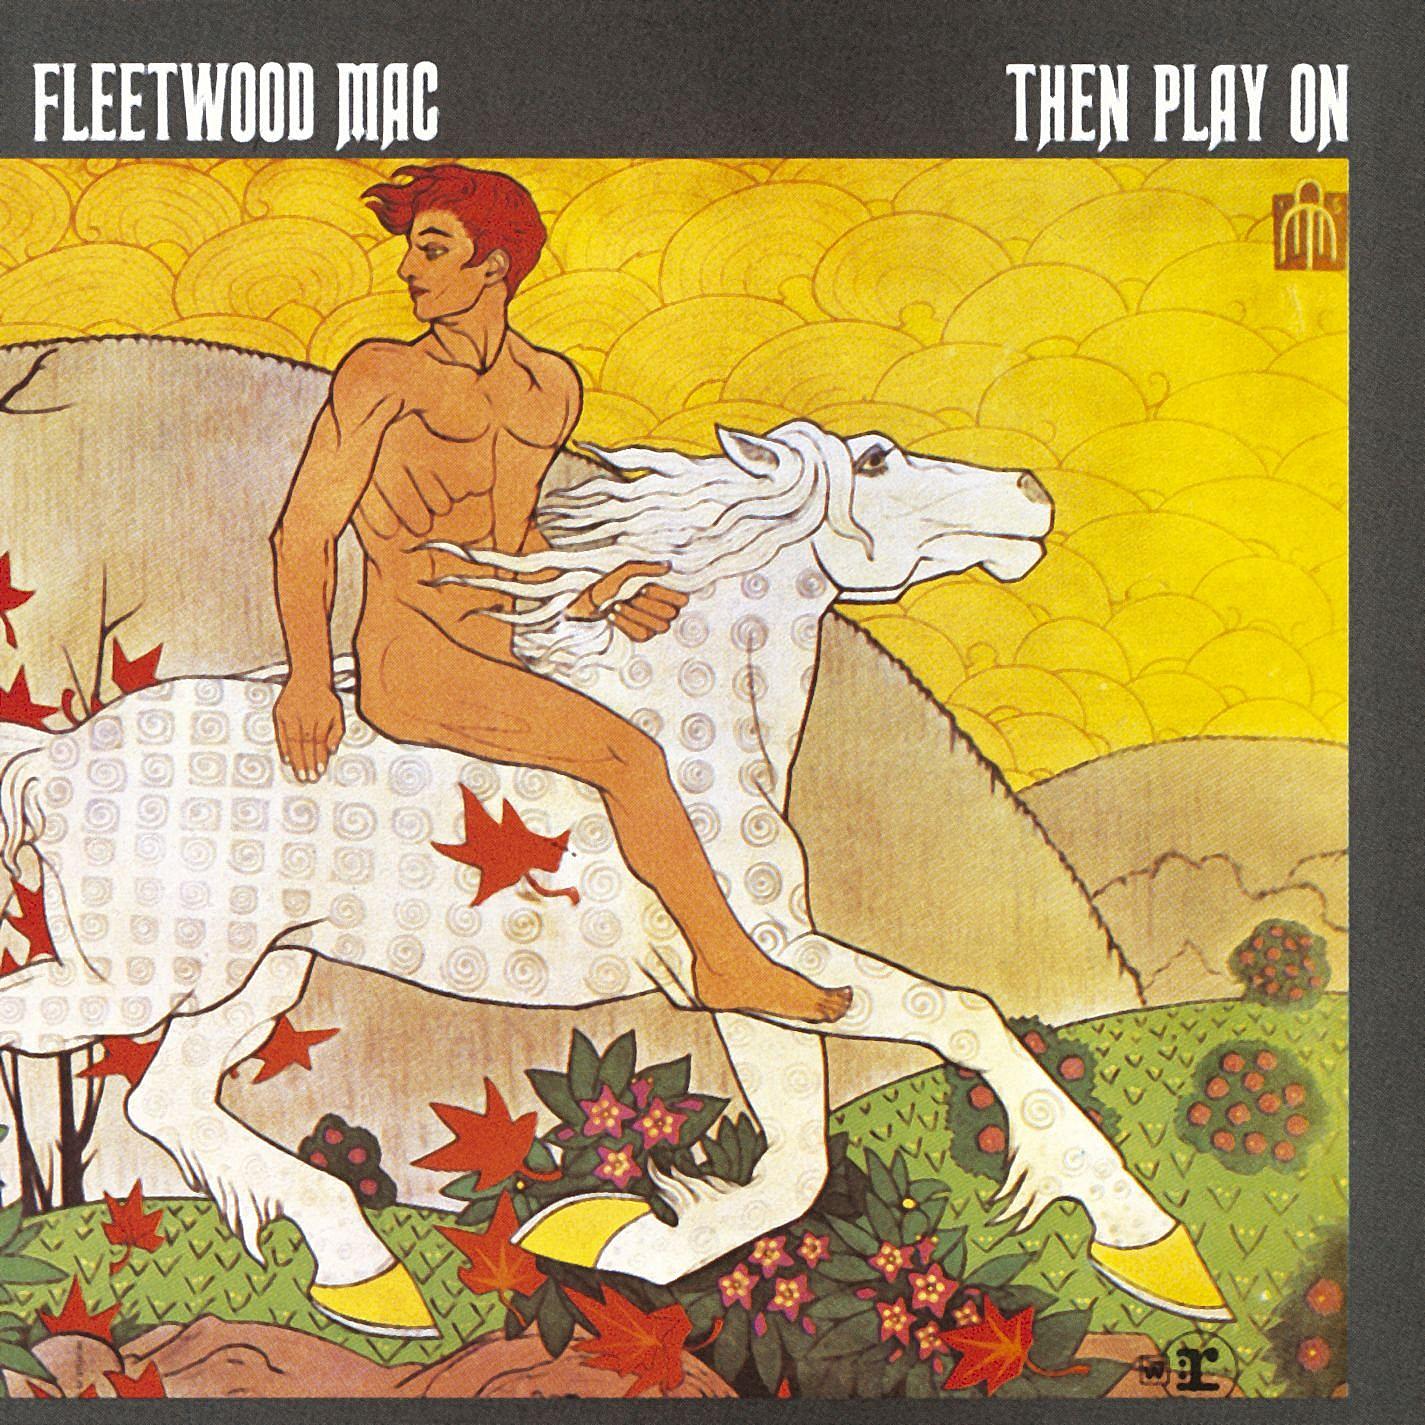 16 essential Fleetwood Mac songs from their early years (1967-1974)